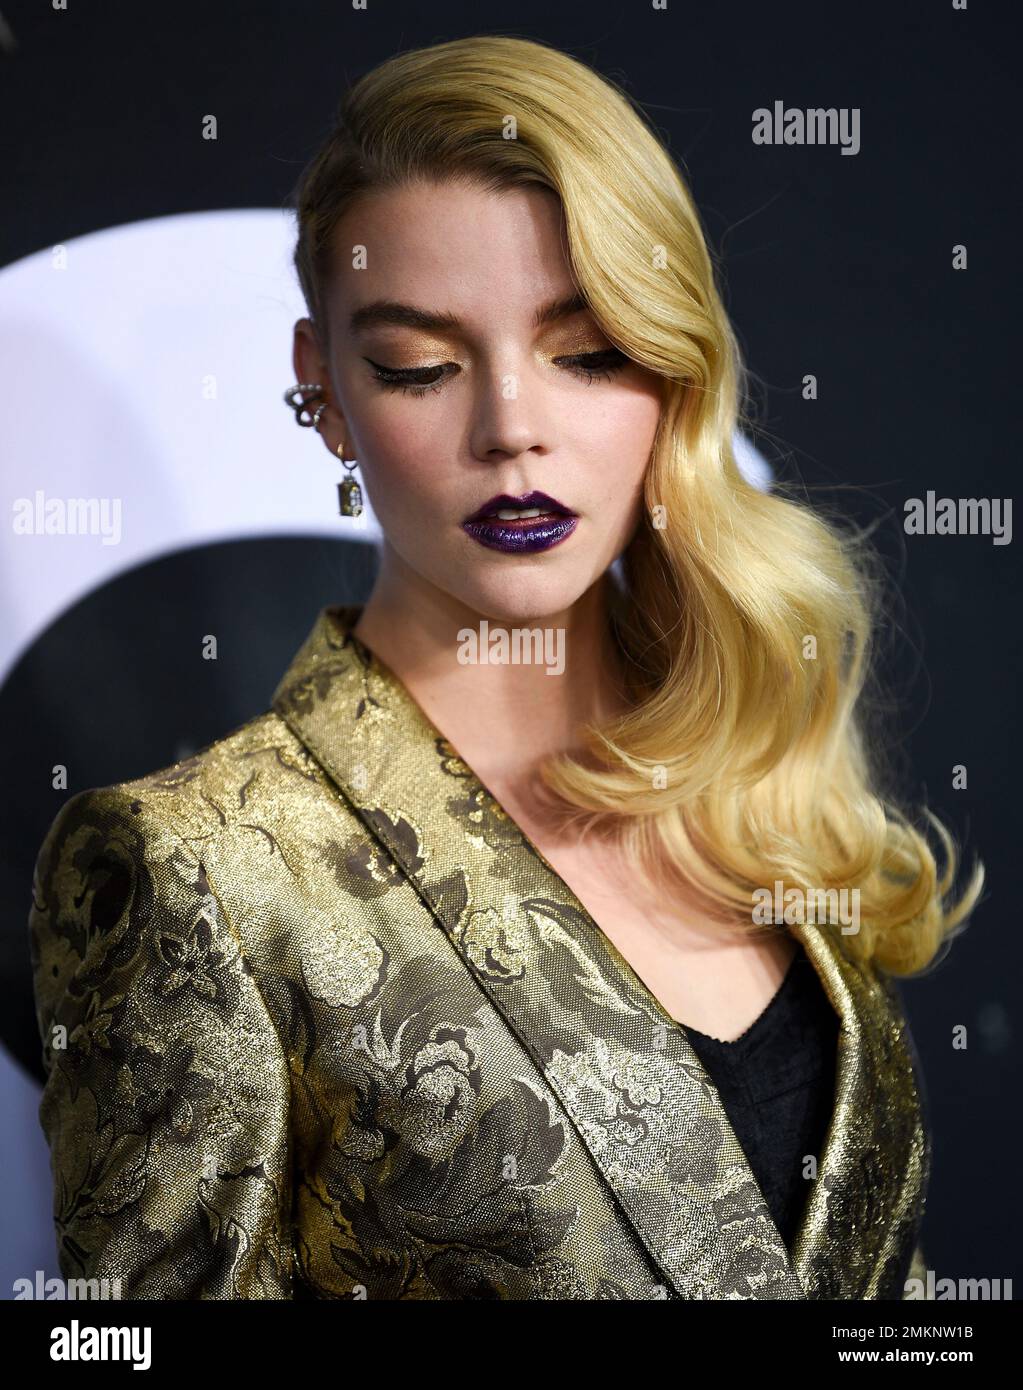 Actress Anya Taylor-Joy attends the premiere of 